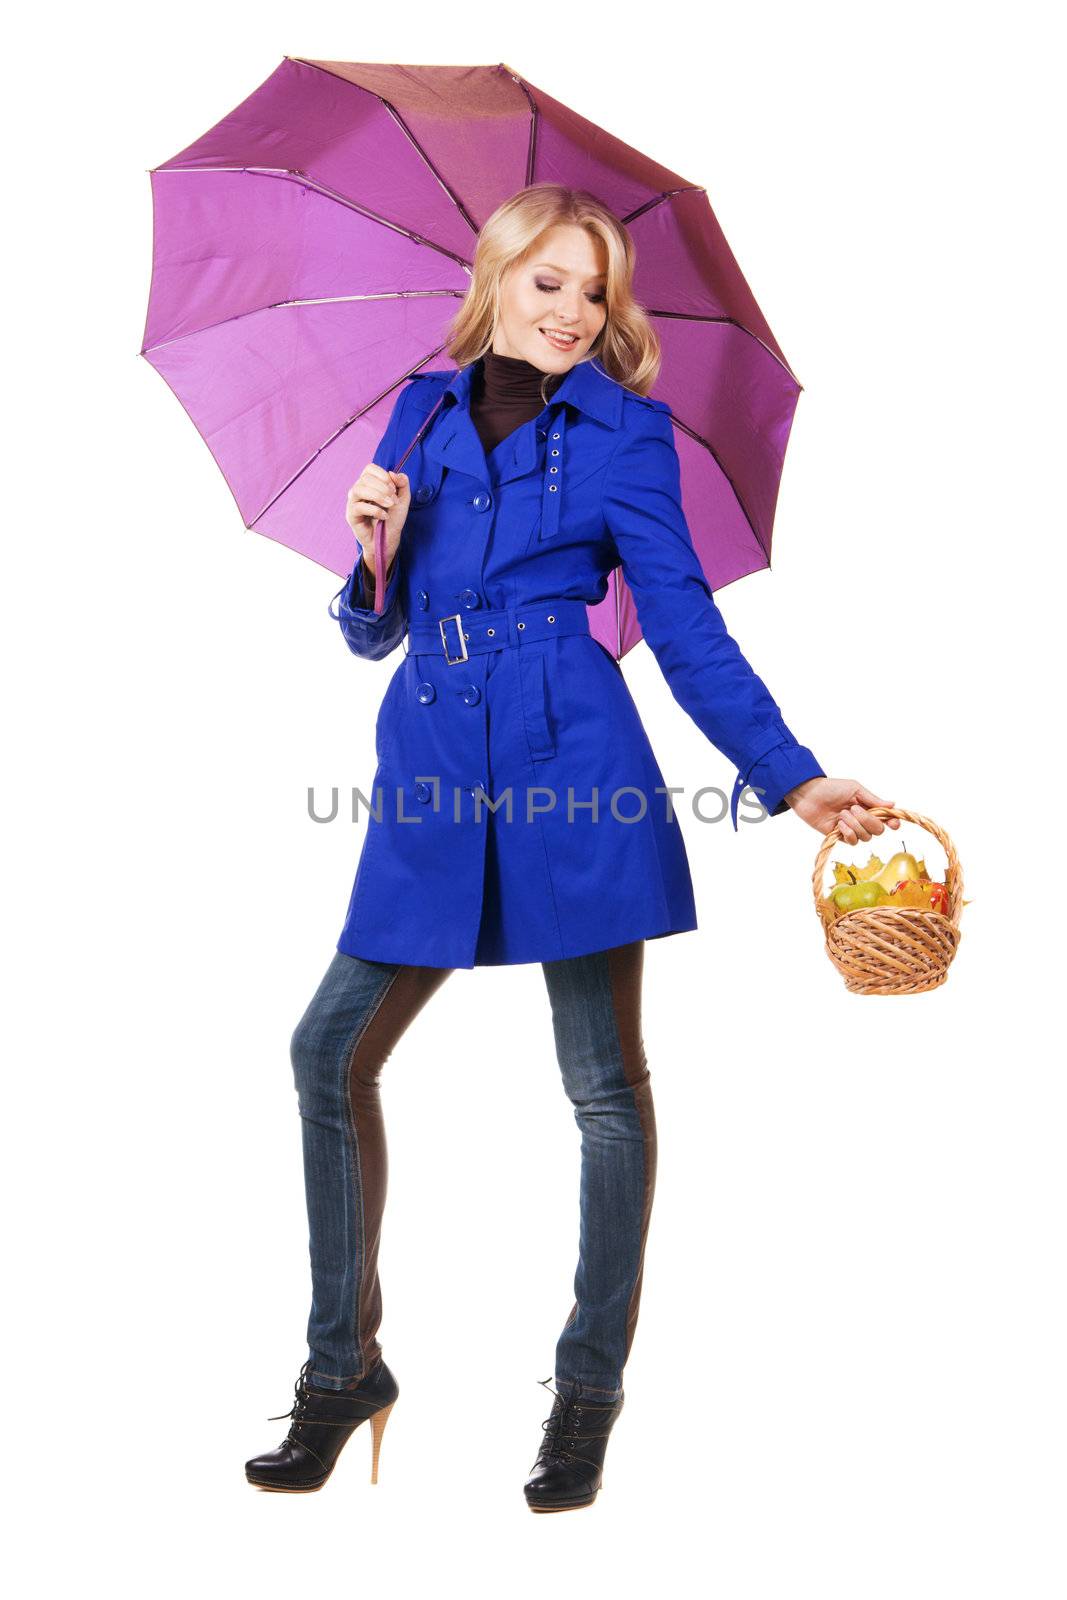 Cheerful girl with a basket of fruit and umbrella, white background 